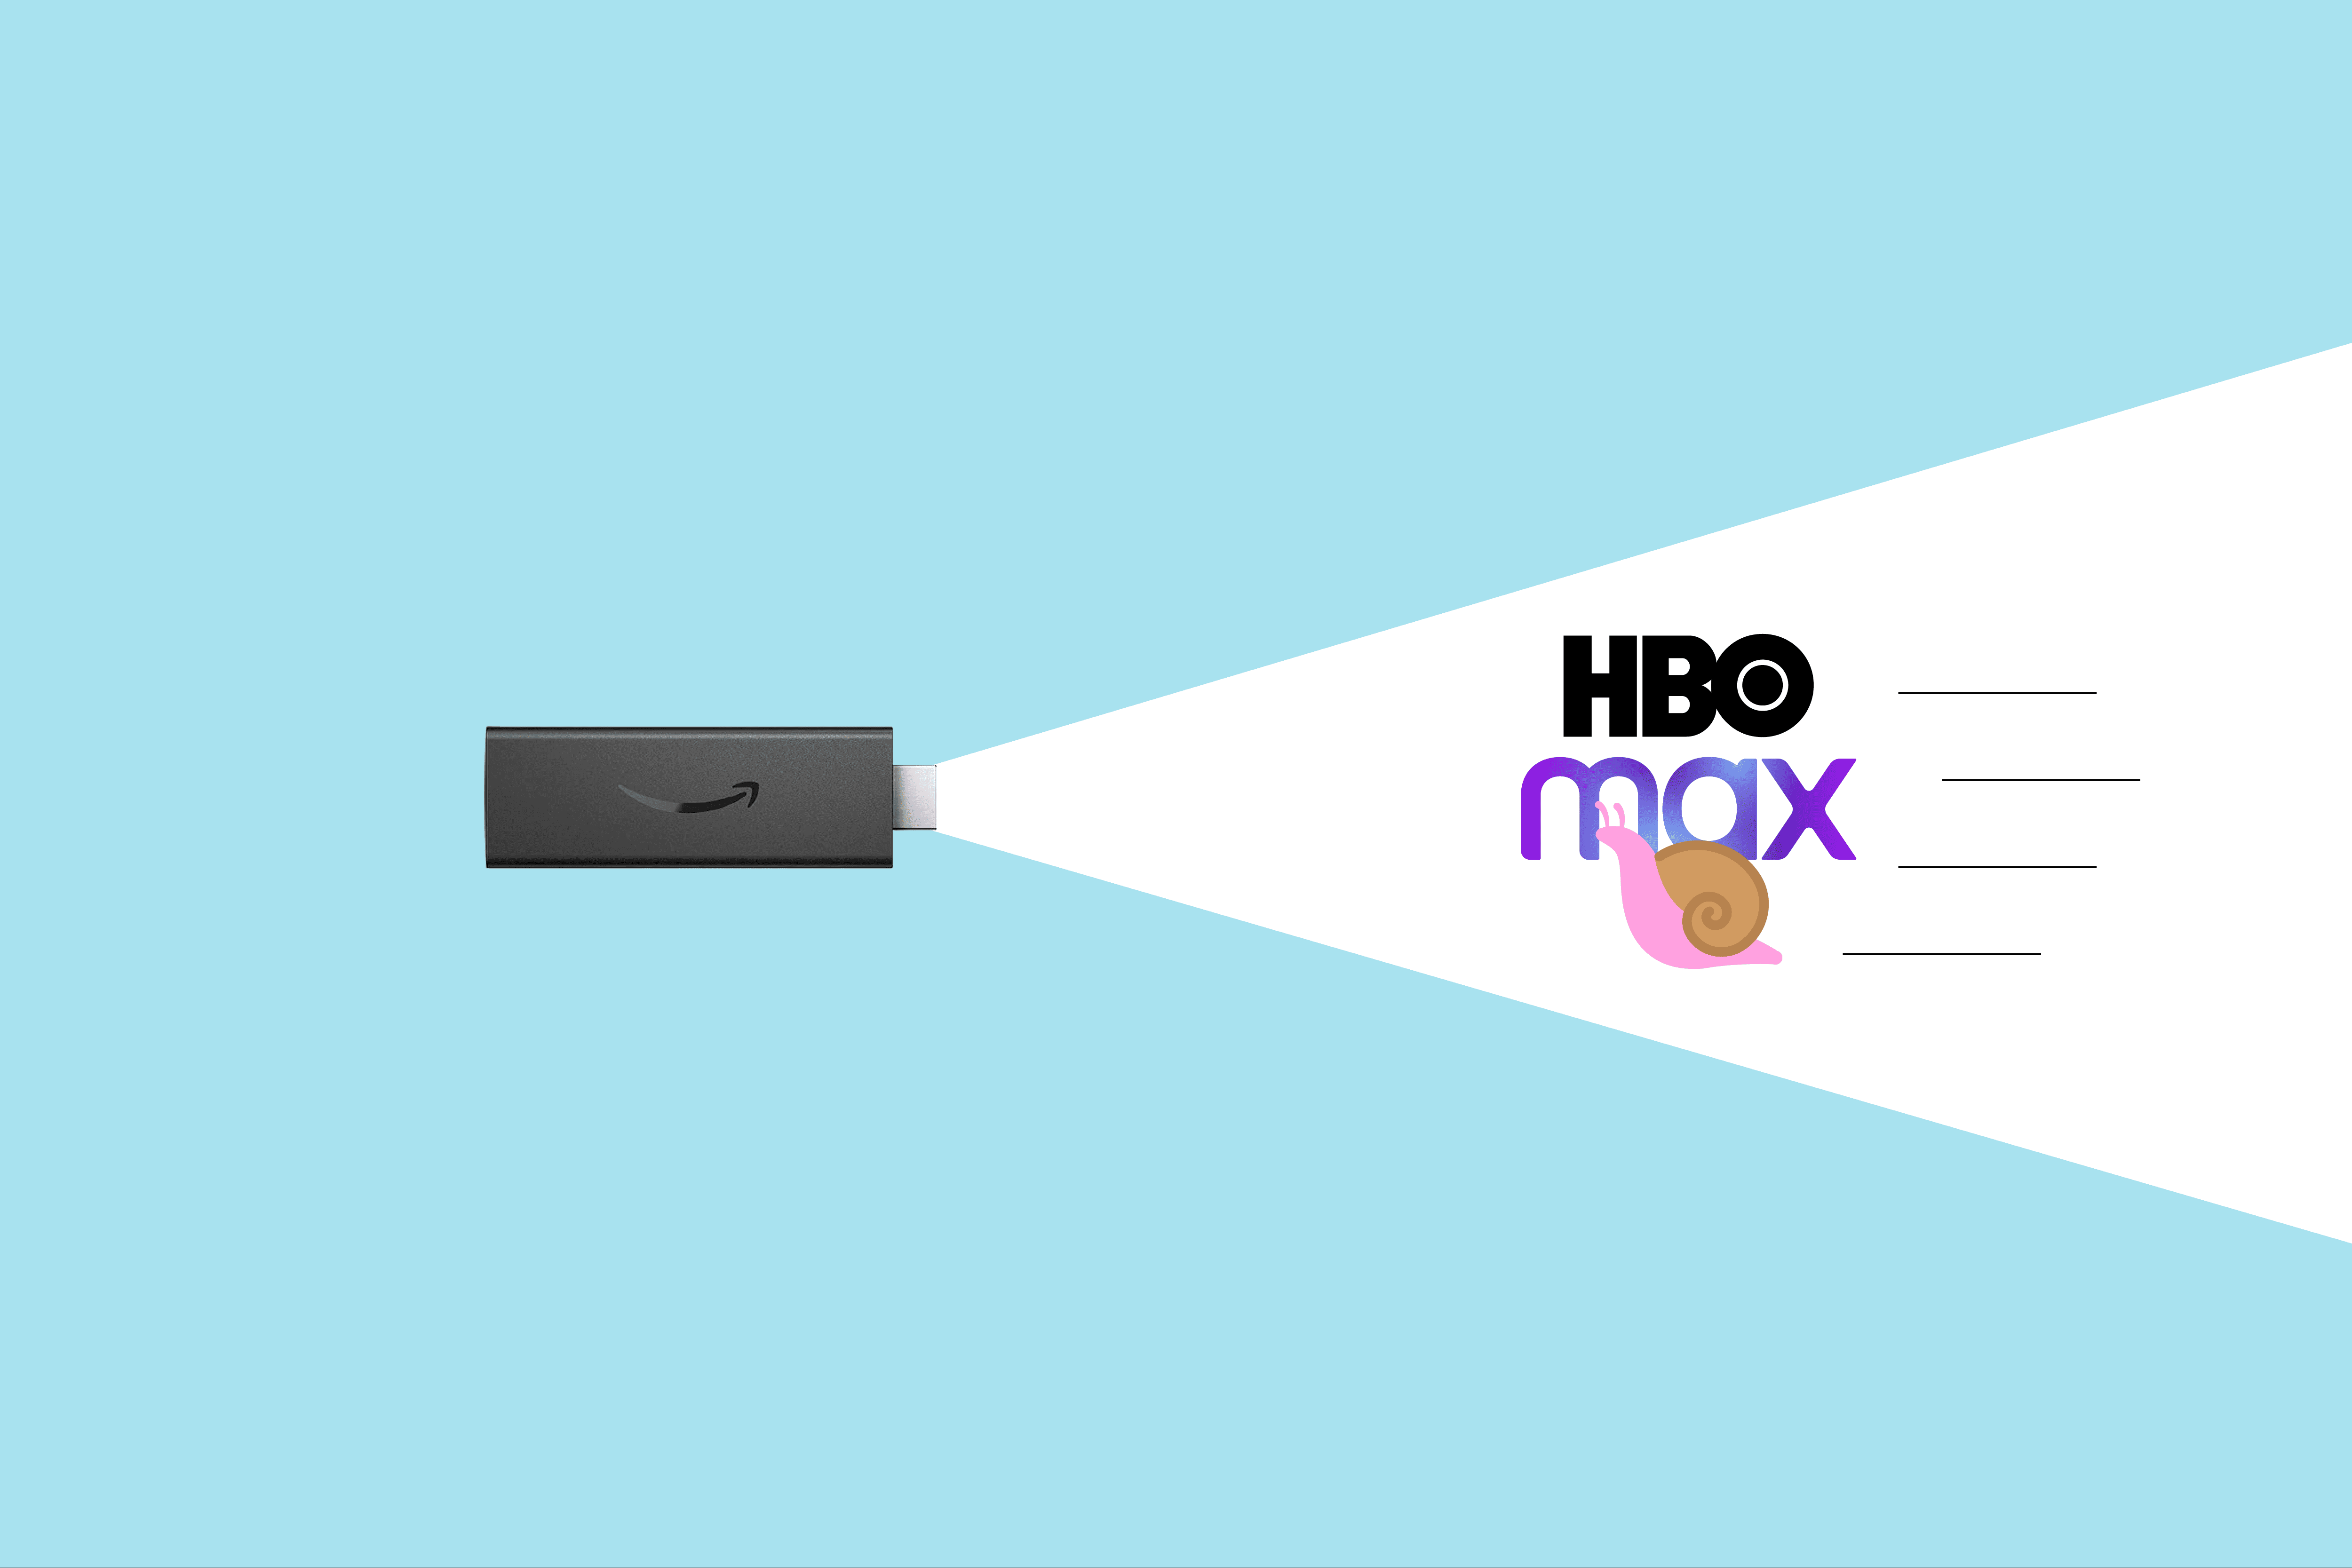 10 Quick Fixes for HBO Max Laggy Issues on Firestick